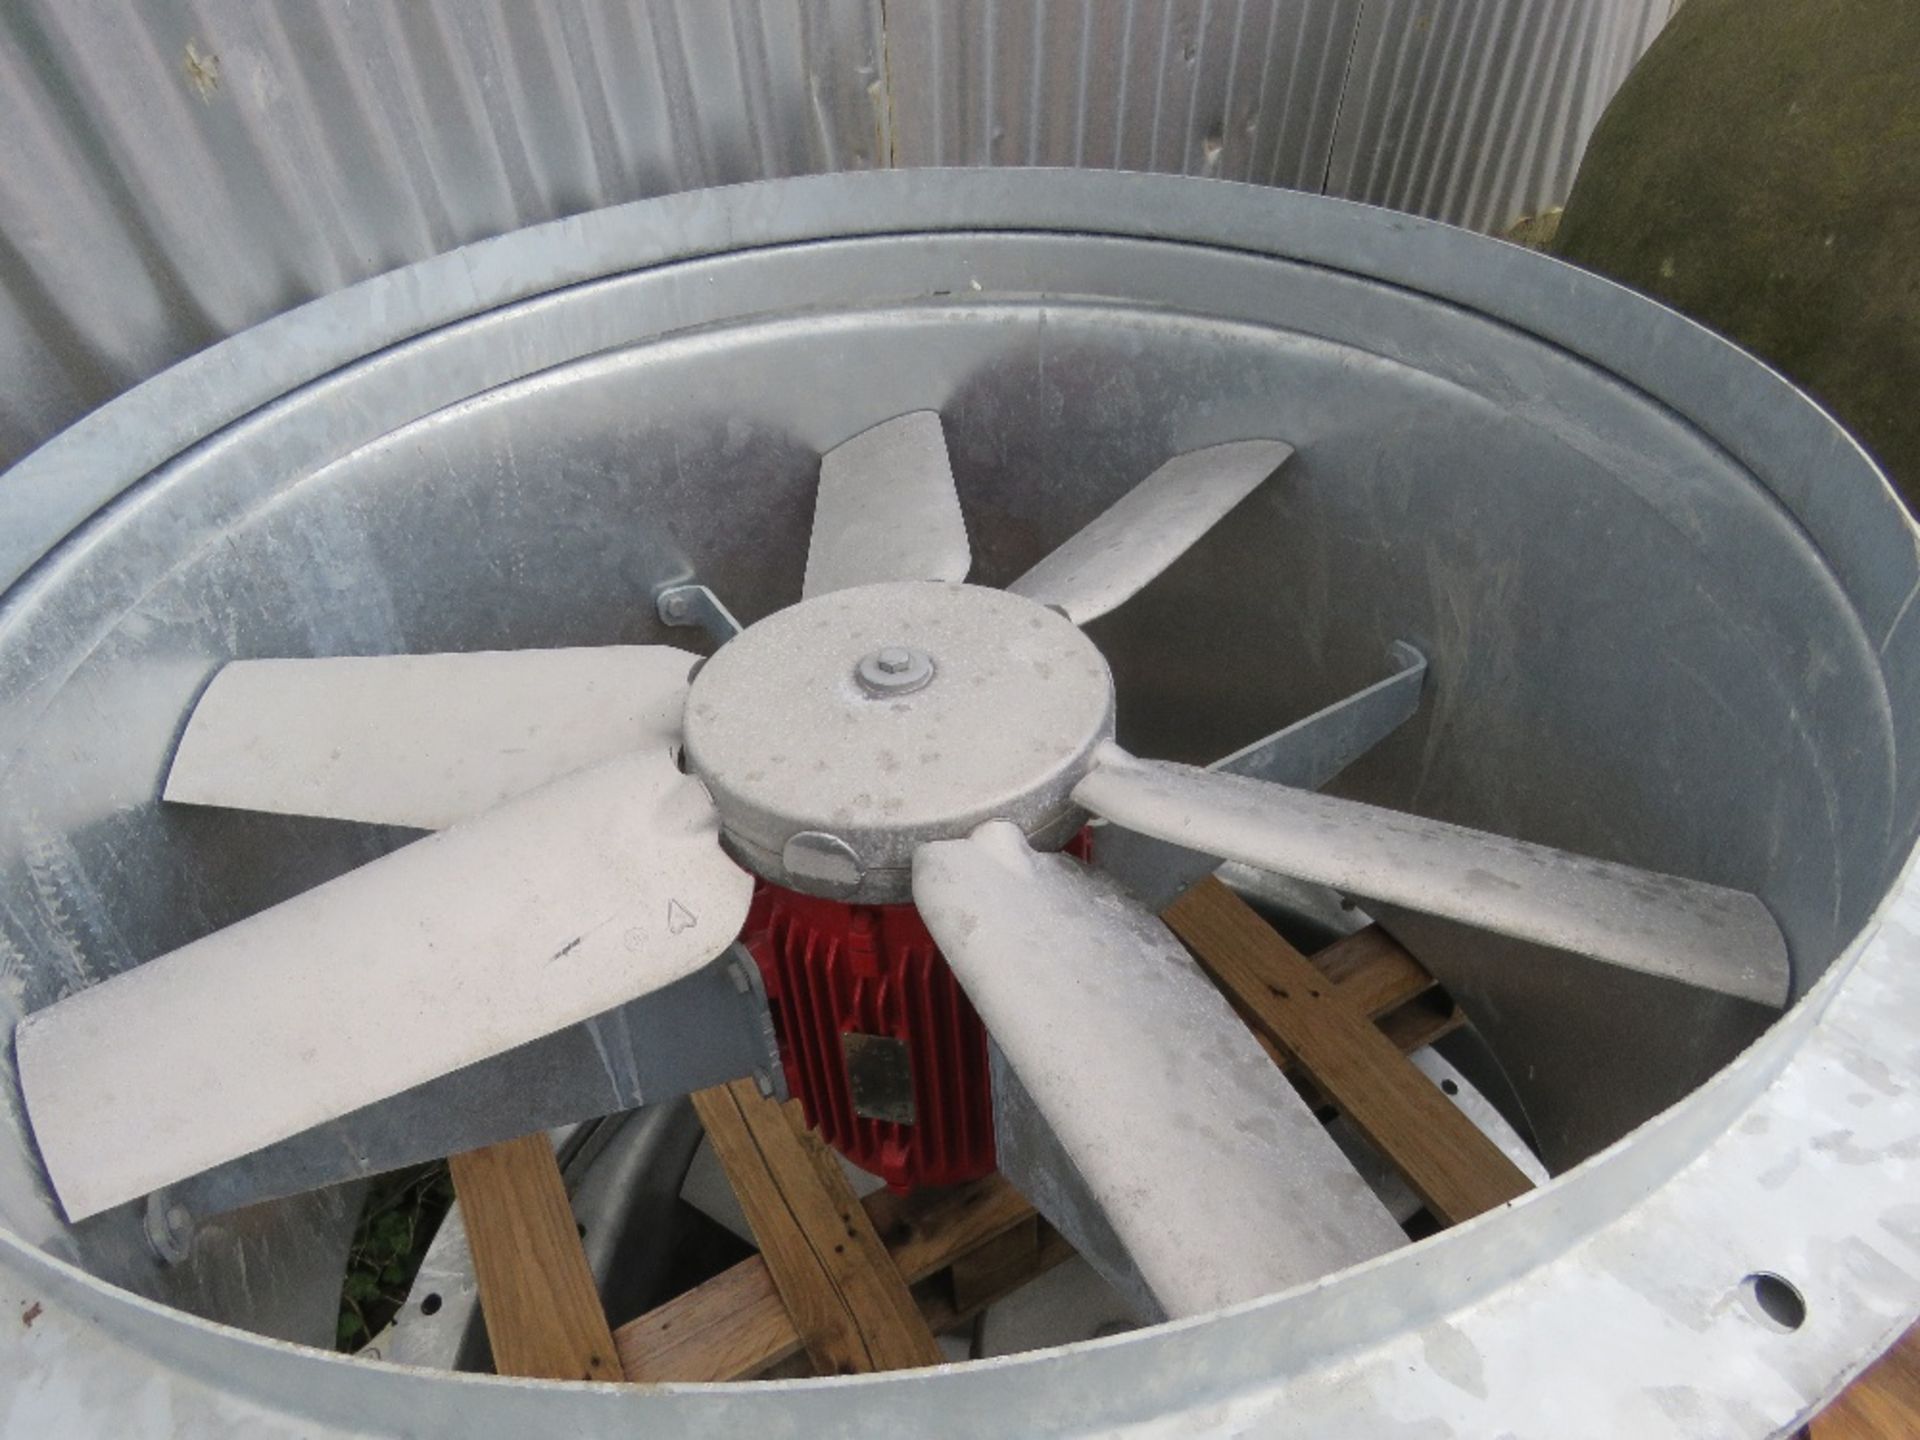 2 X LARGE INDUSTRIAL FANS, APPEAR UNUSED?? TYPE 380-420. 90CM INTERNAL DIAMETER. SOURCED FROM LARGE - Image 2 of 3